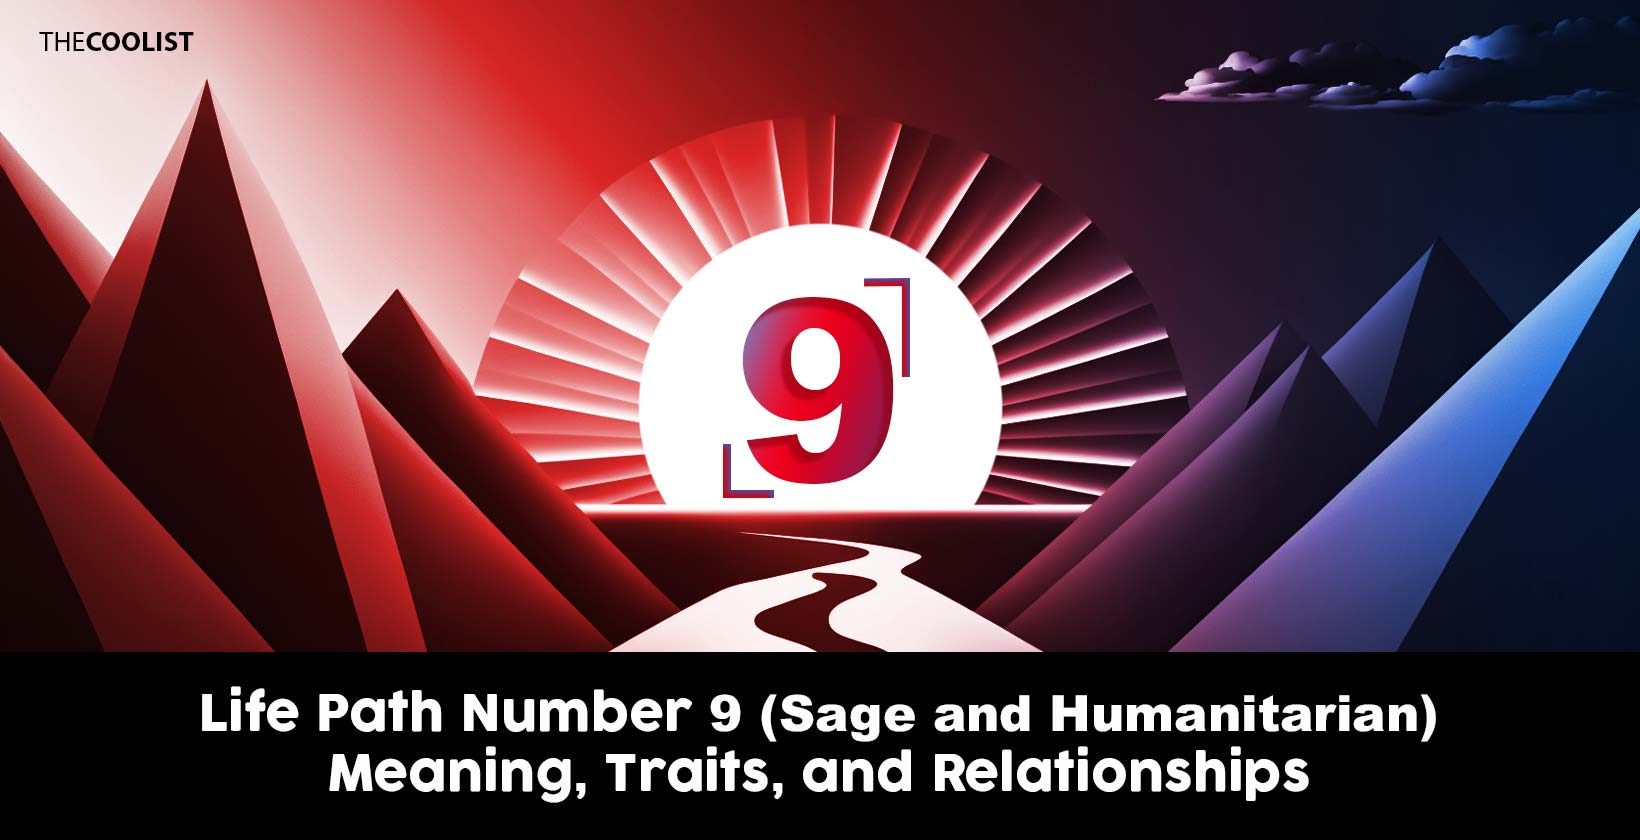 Life Path Number 9 (Sage and Humanitarian) Meaning, Traits, and Relationships